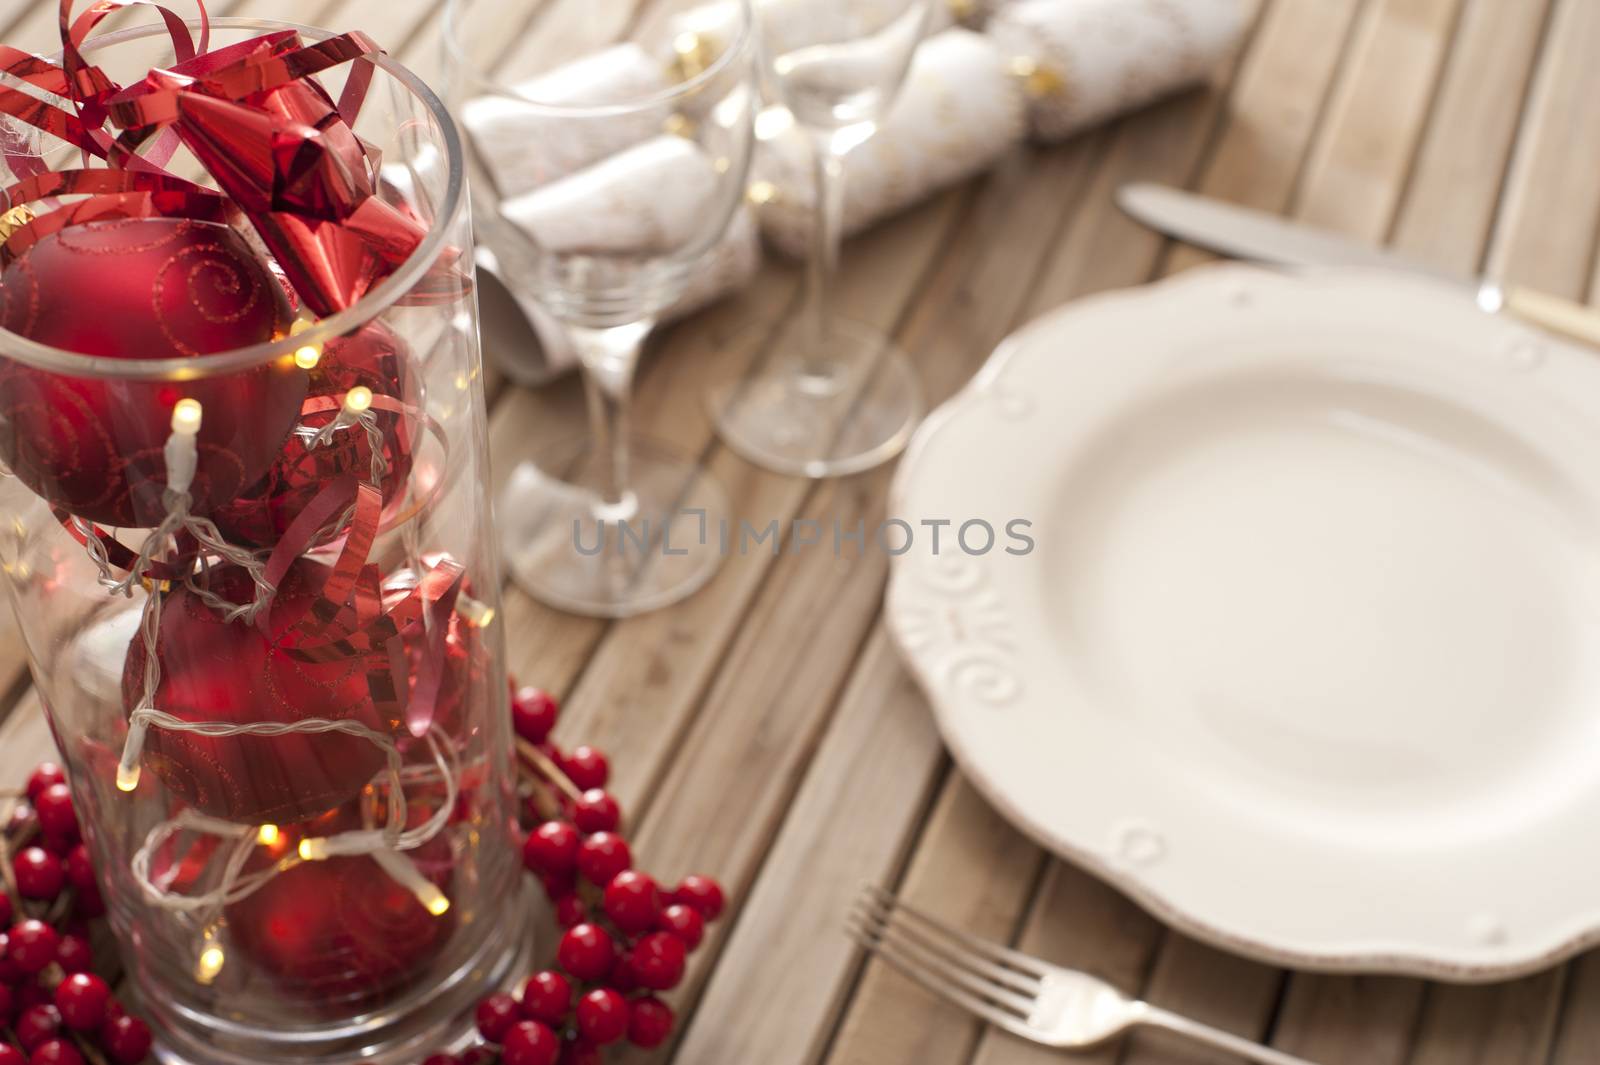 Christmas place setting with red themed decorations in a glass container surrounded by colorful red berries with a white empty plate, glassware, utensils and crackers